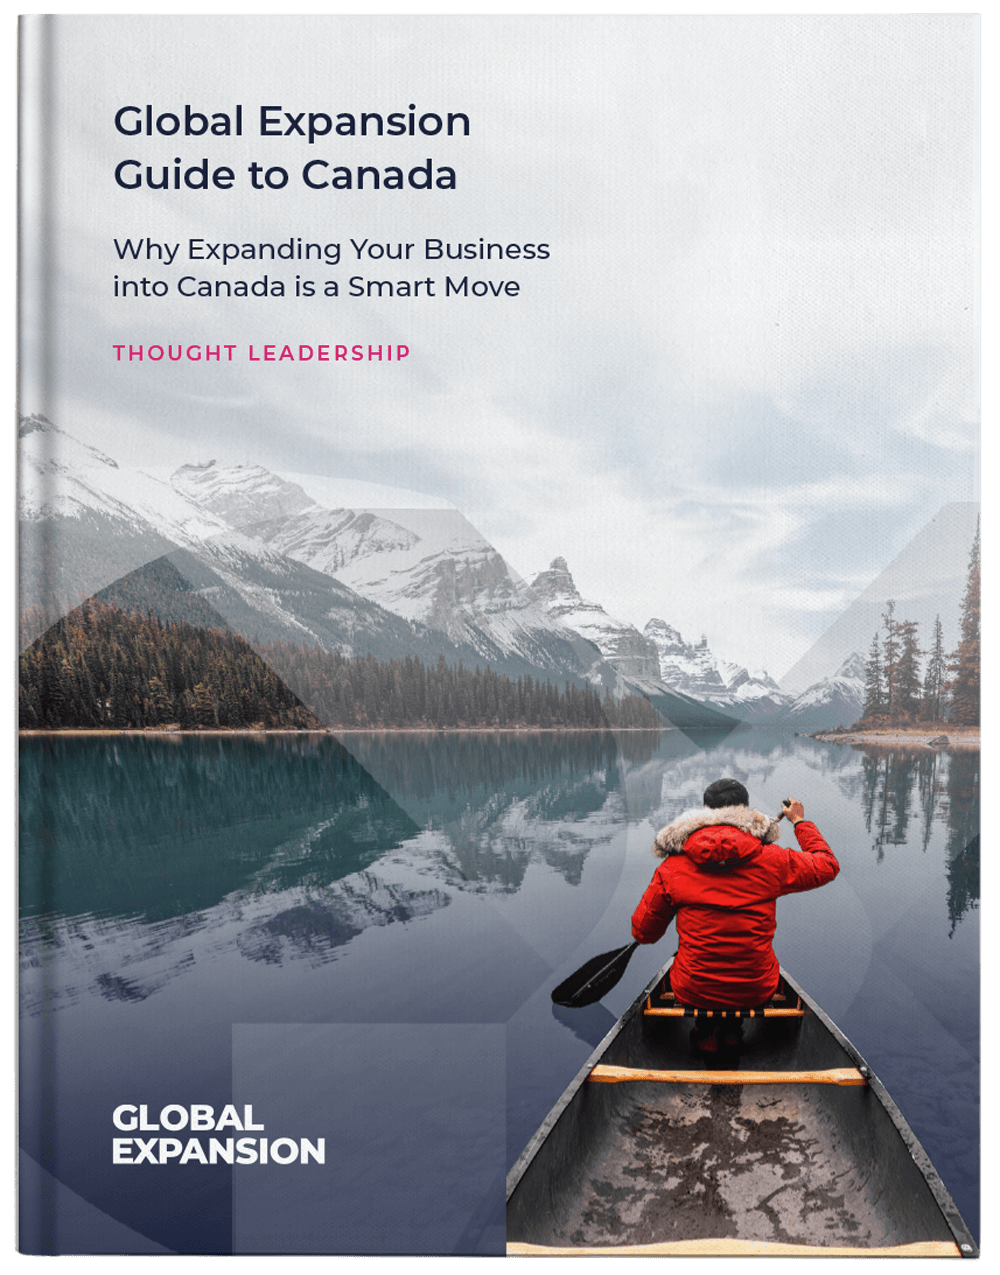 GX_Global-Expansion-Guide-to-Canada-Cover